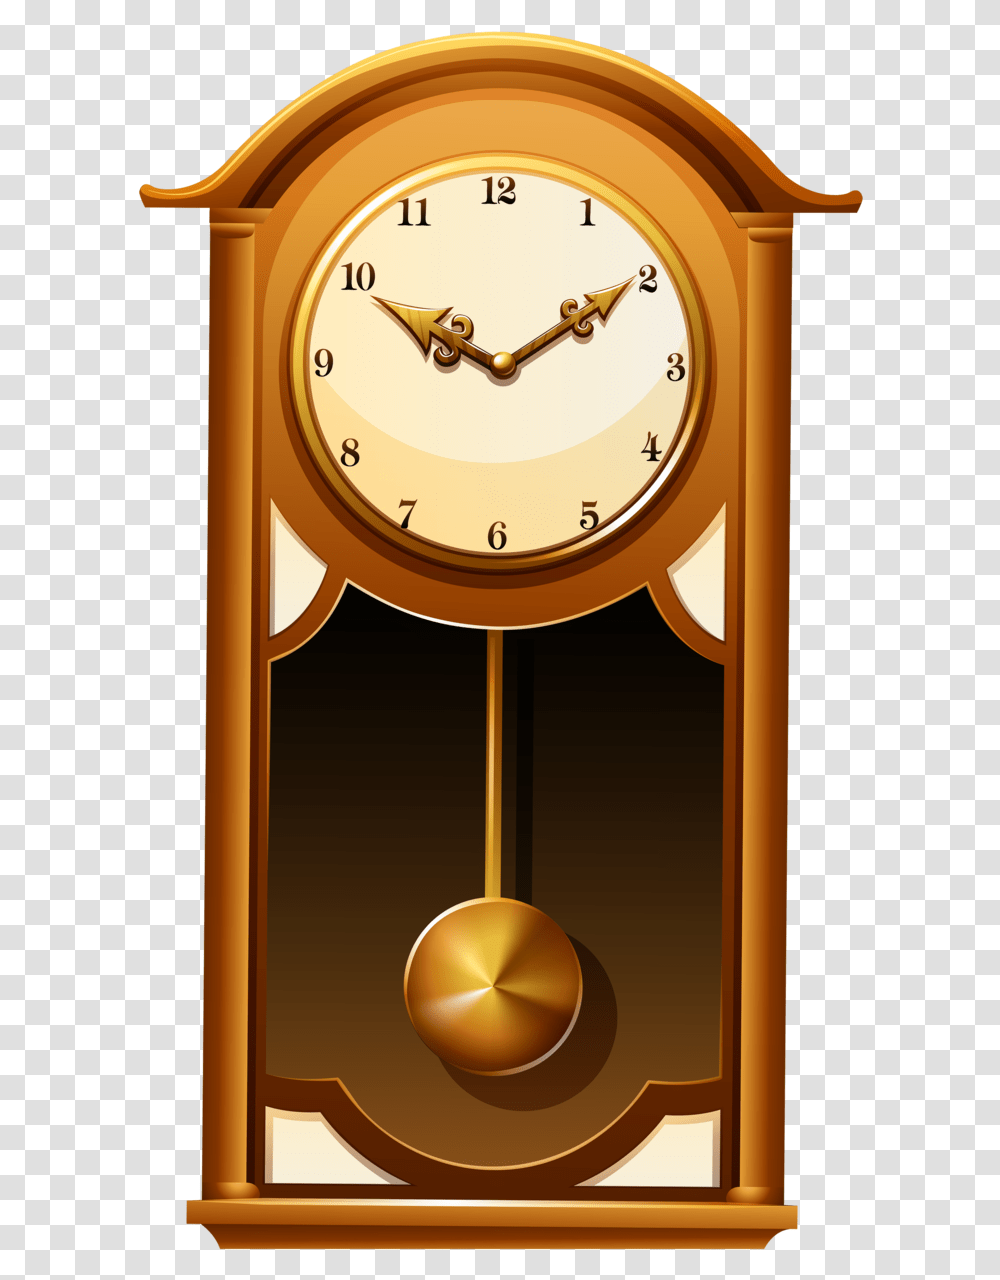 Antique Wall Clockpng Clip Art Vintage Illustrations Objects, Analog Clock, Clock Tower, Architecture, Building Transparent Png